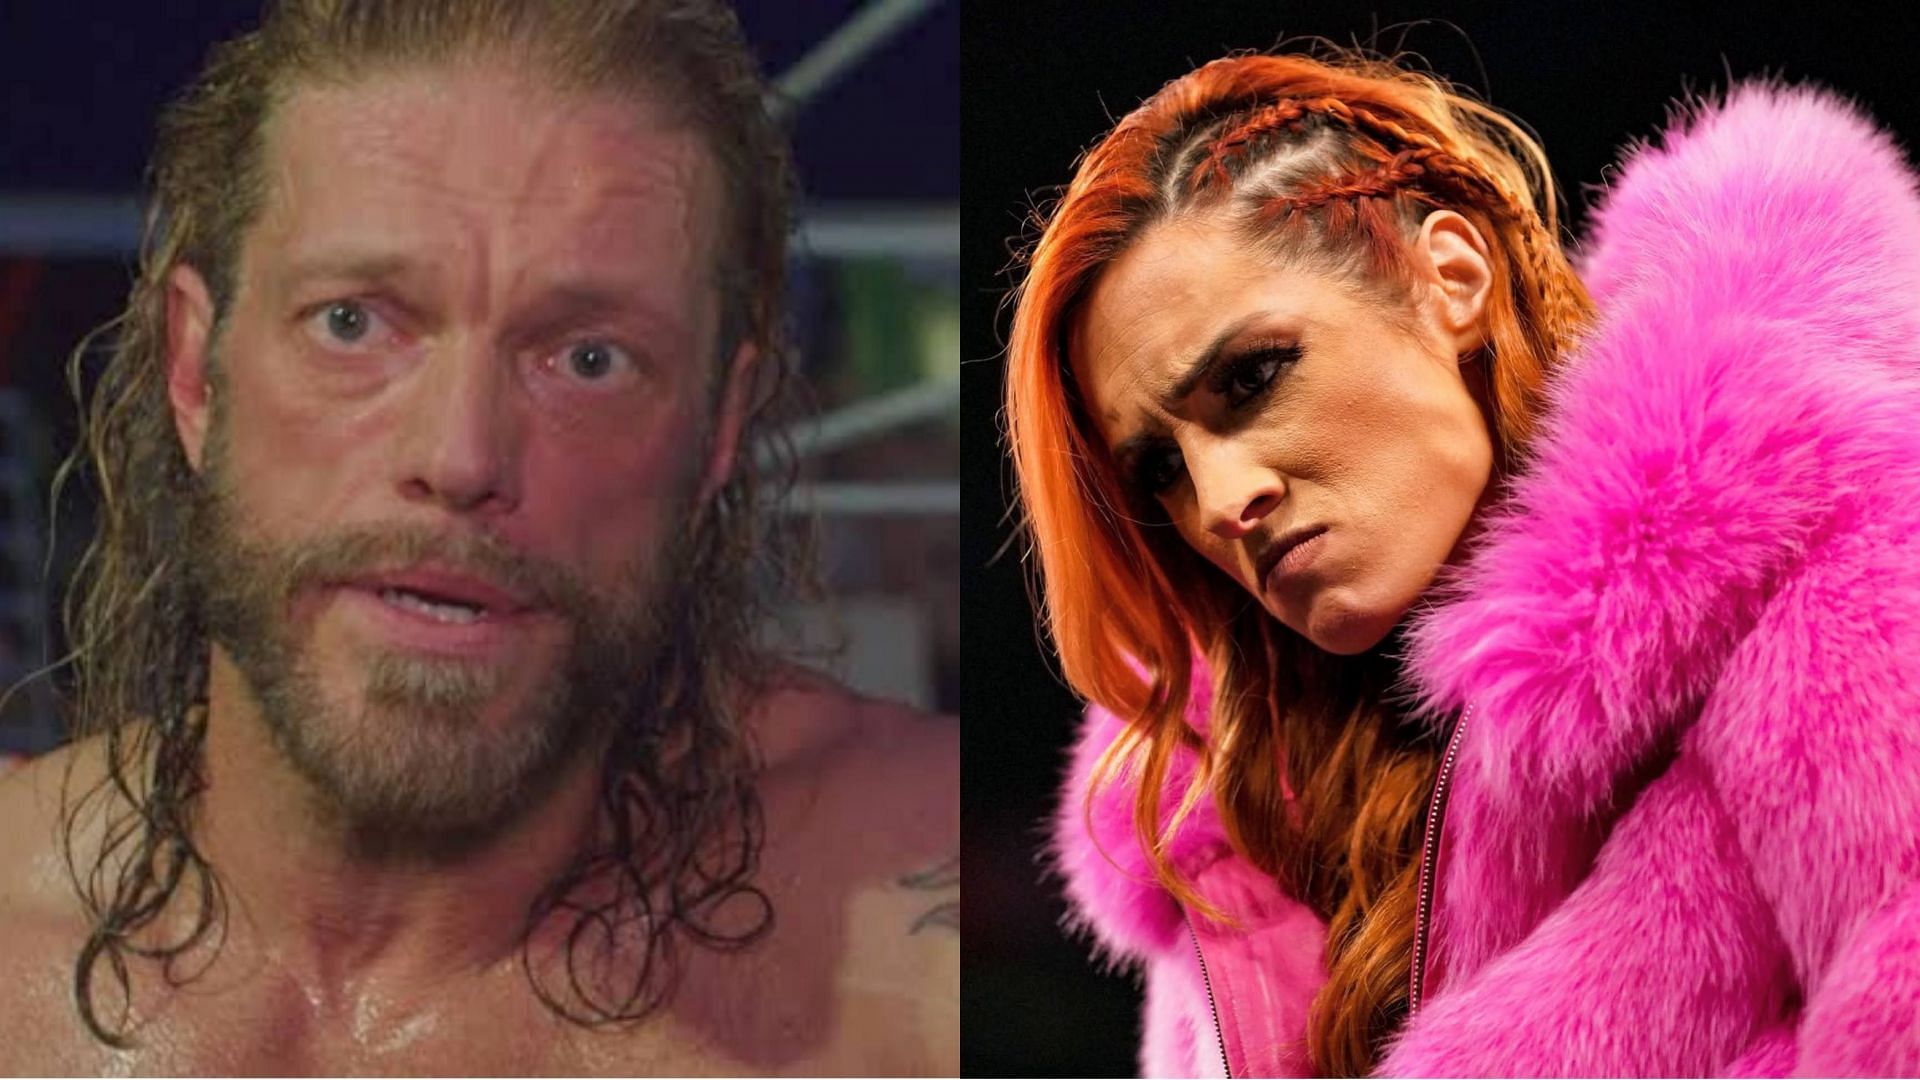 Edge (left) and Becky Lynch (right)